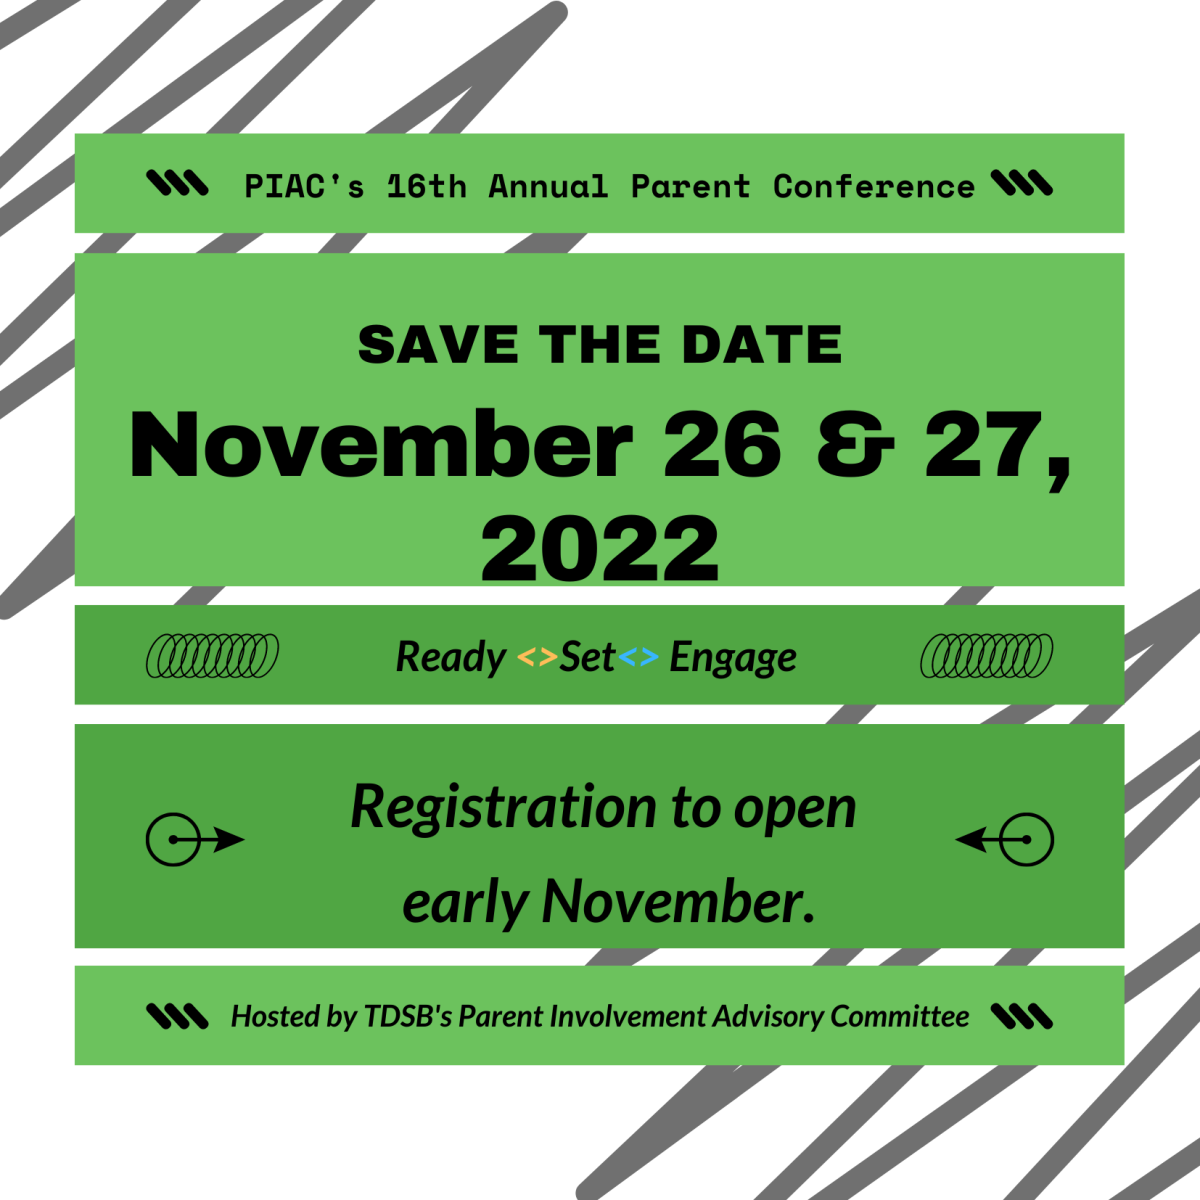 PIAC's 16th Annual Parents Conference is on November 26 & 27 2022